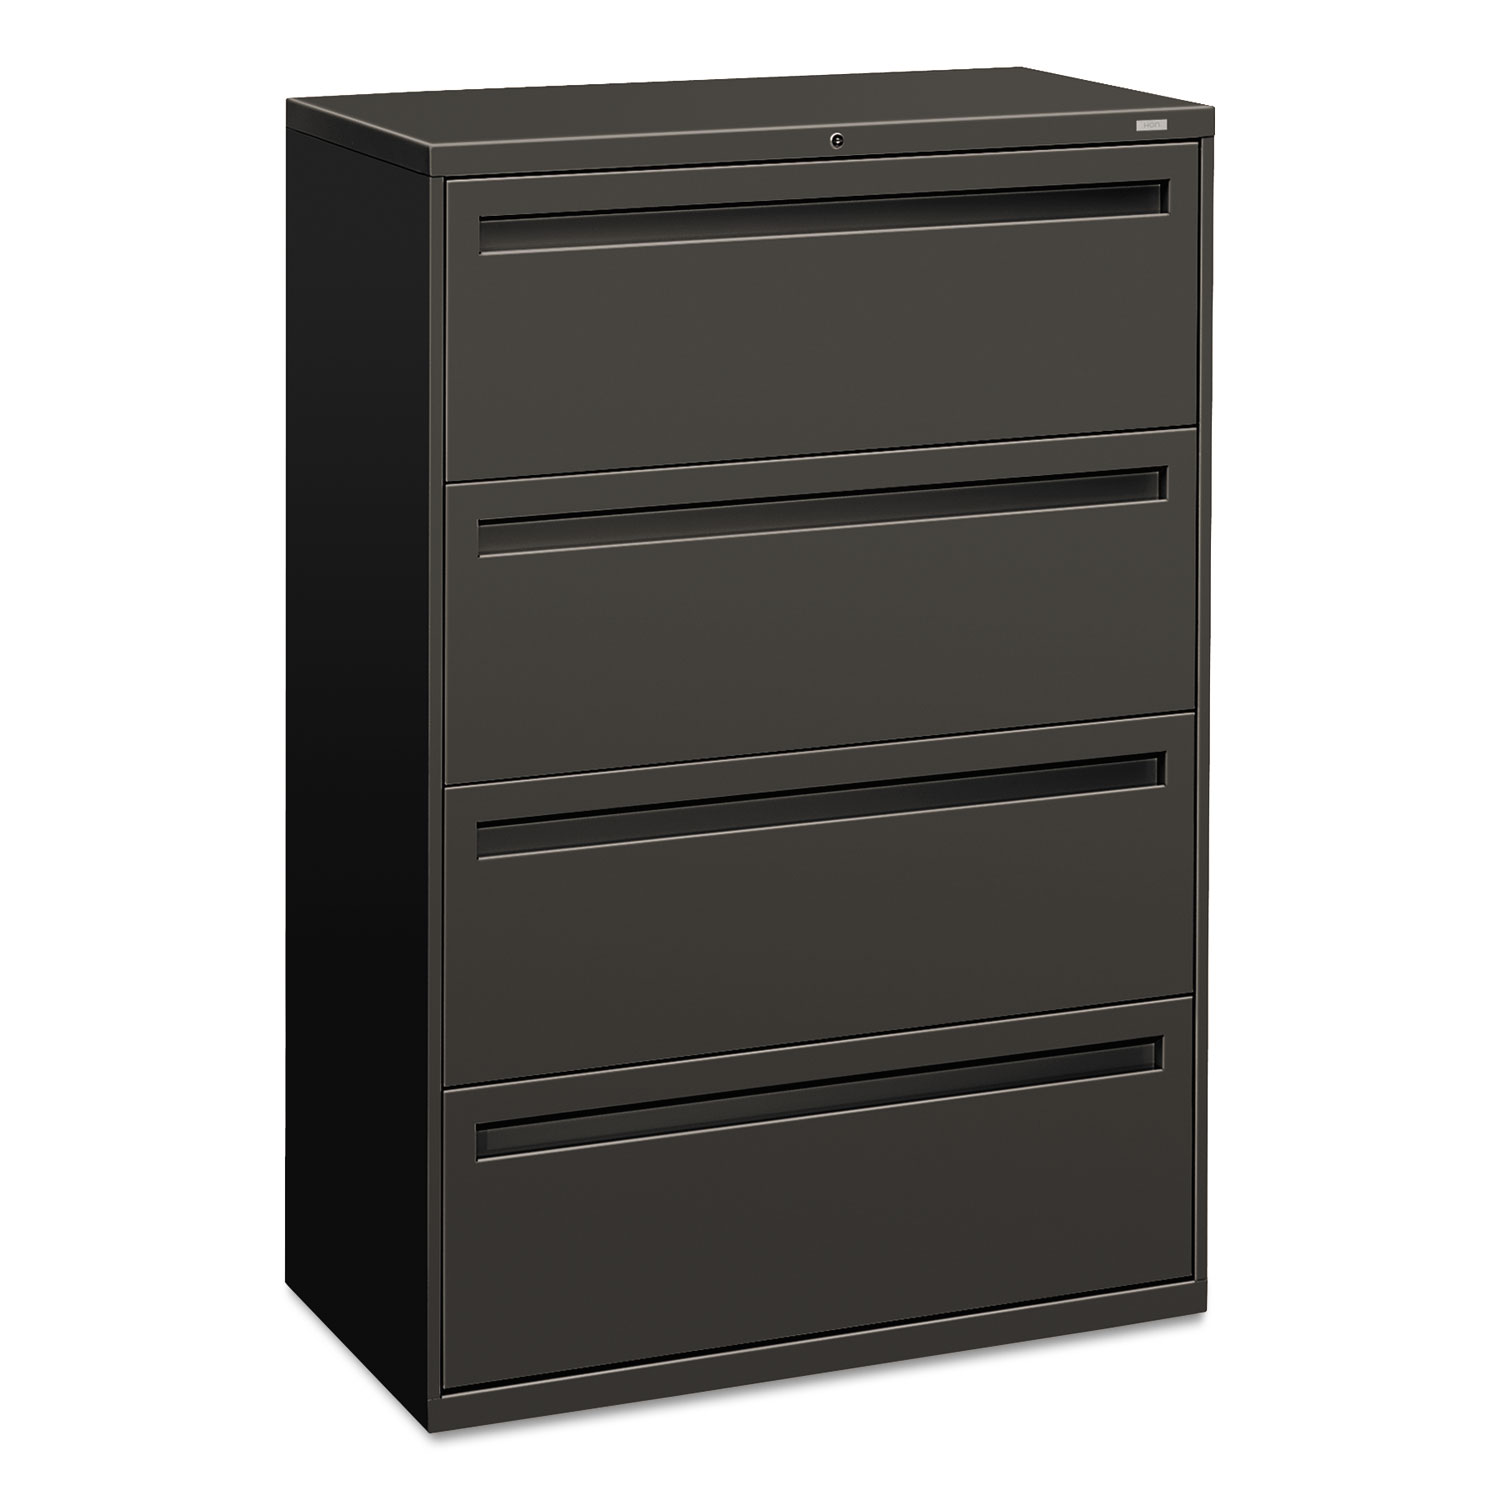 700 Series Four-Drawer Lateral File, 36w x 18d x 52 1/2h, Charcoal